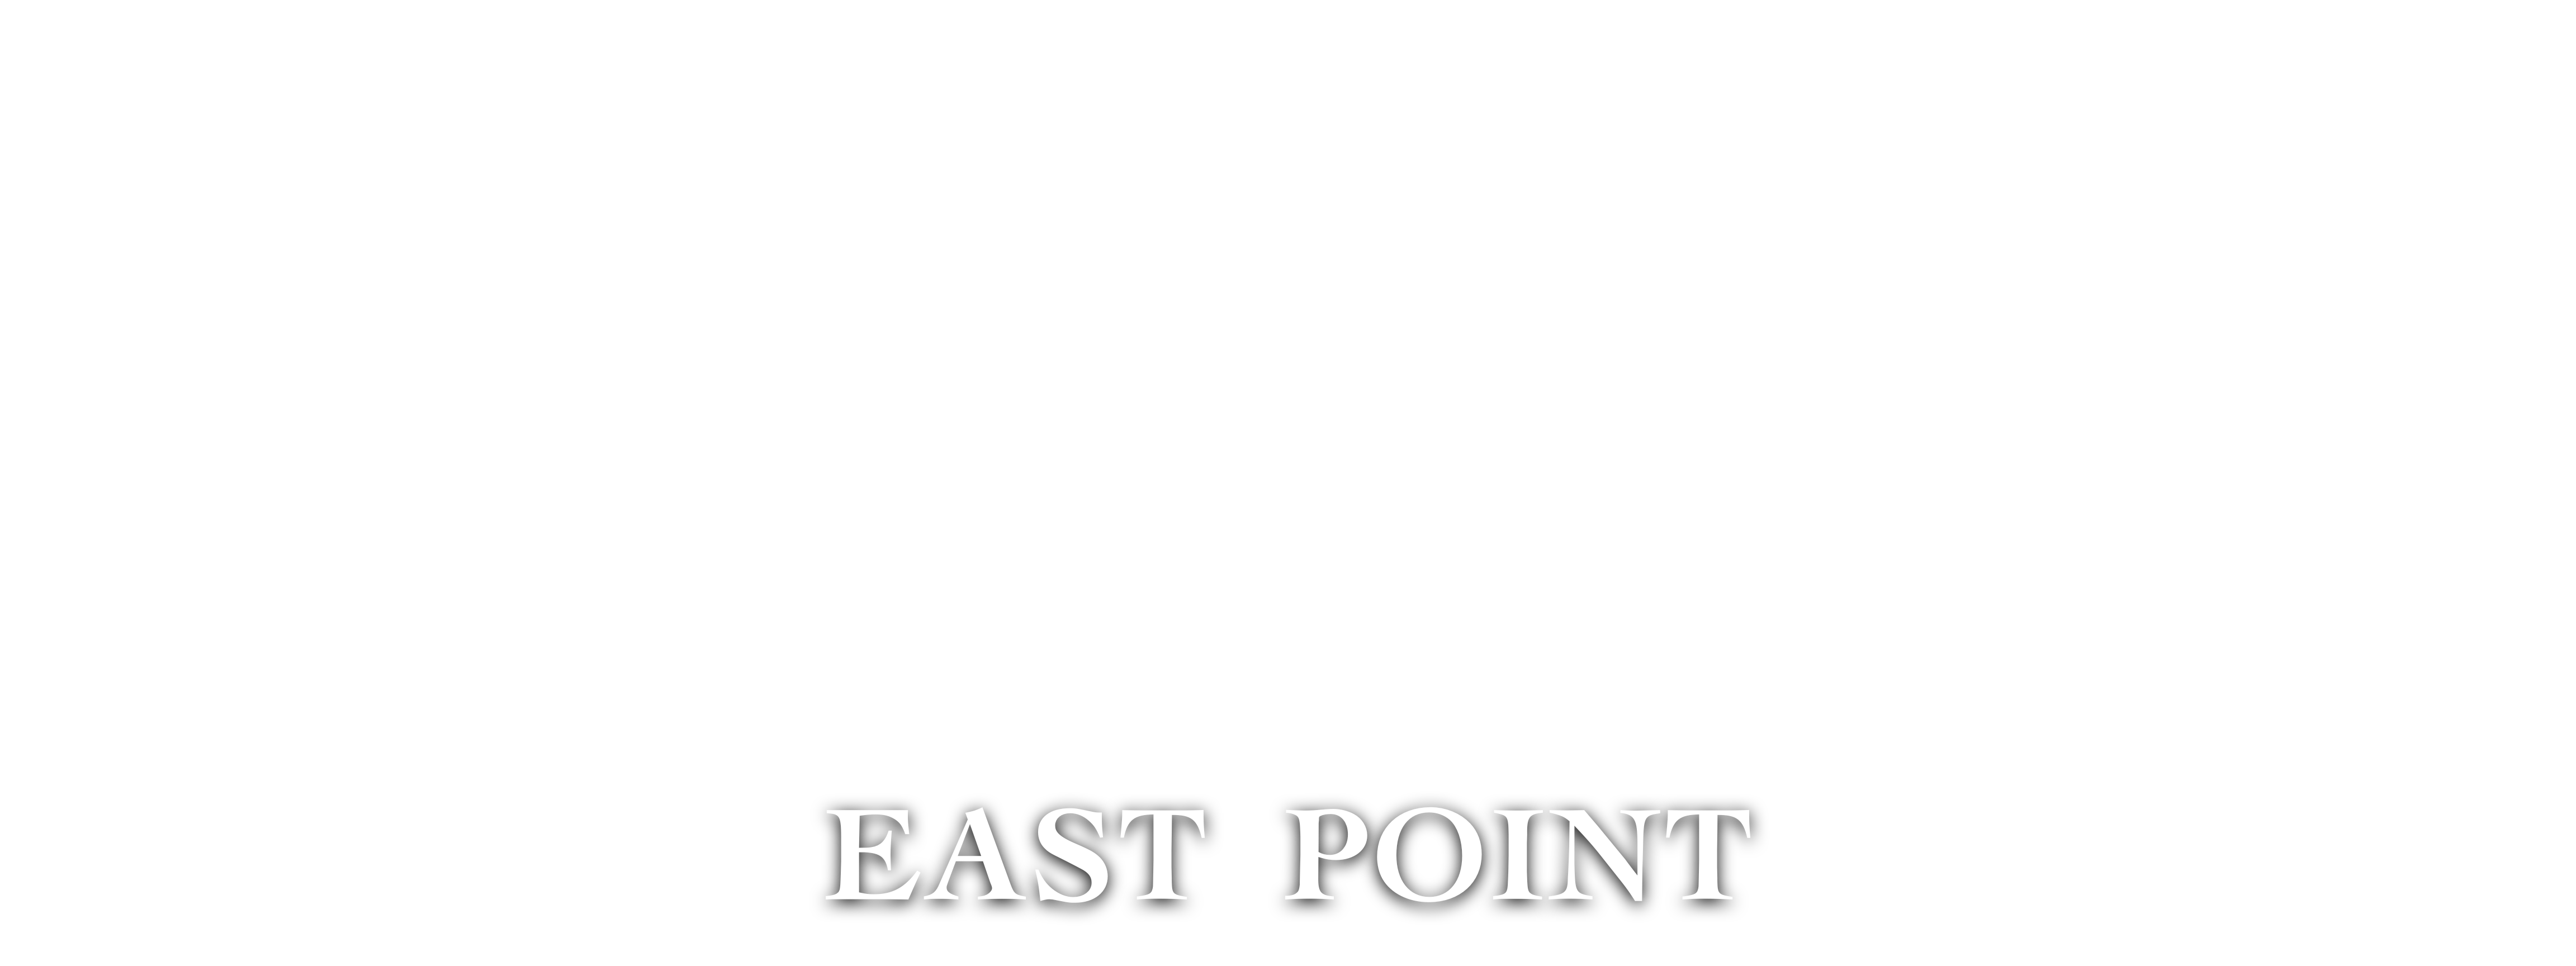 EAST POINT